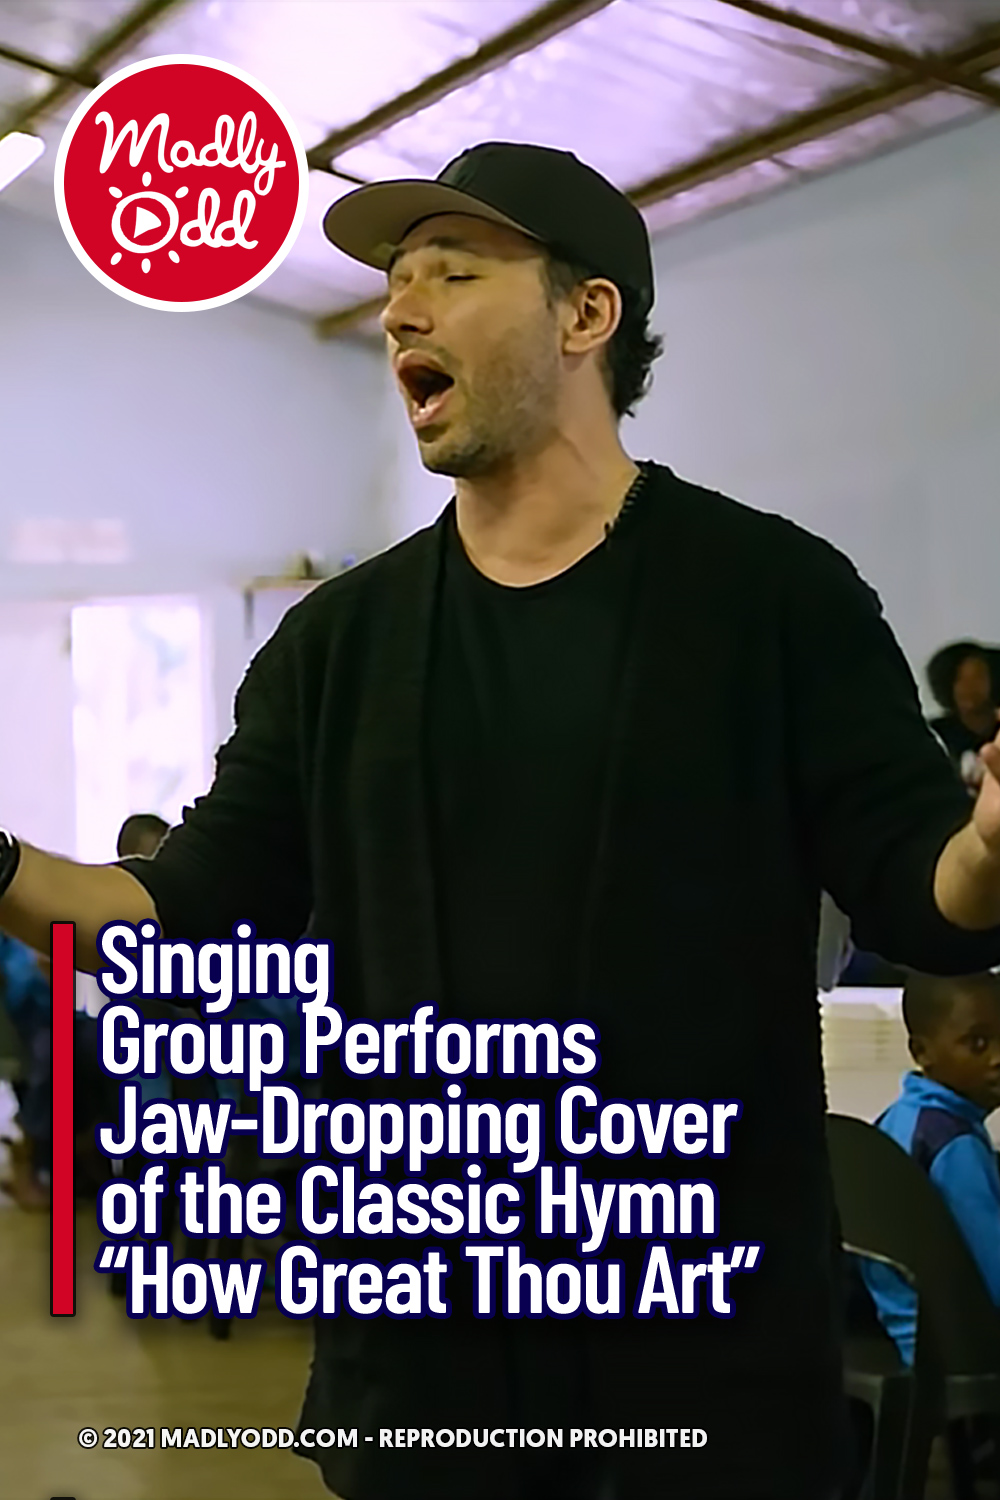 Singing Group Performs Jaw-Dropping Cover of the Classic Hymn “How Great Thou Art”